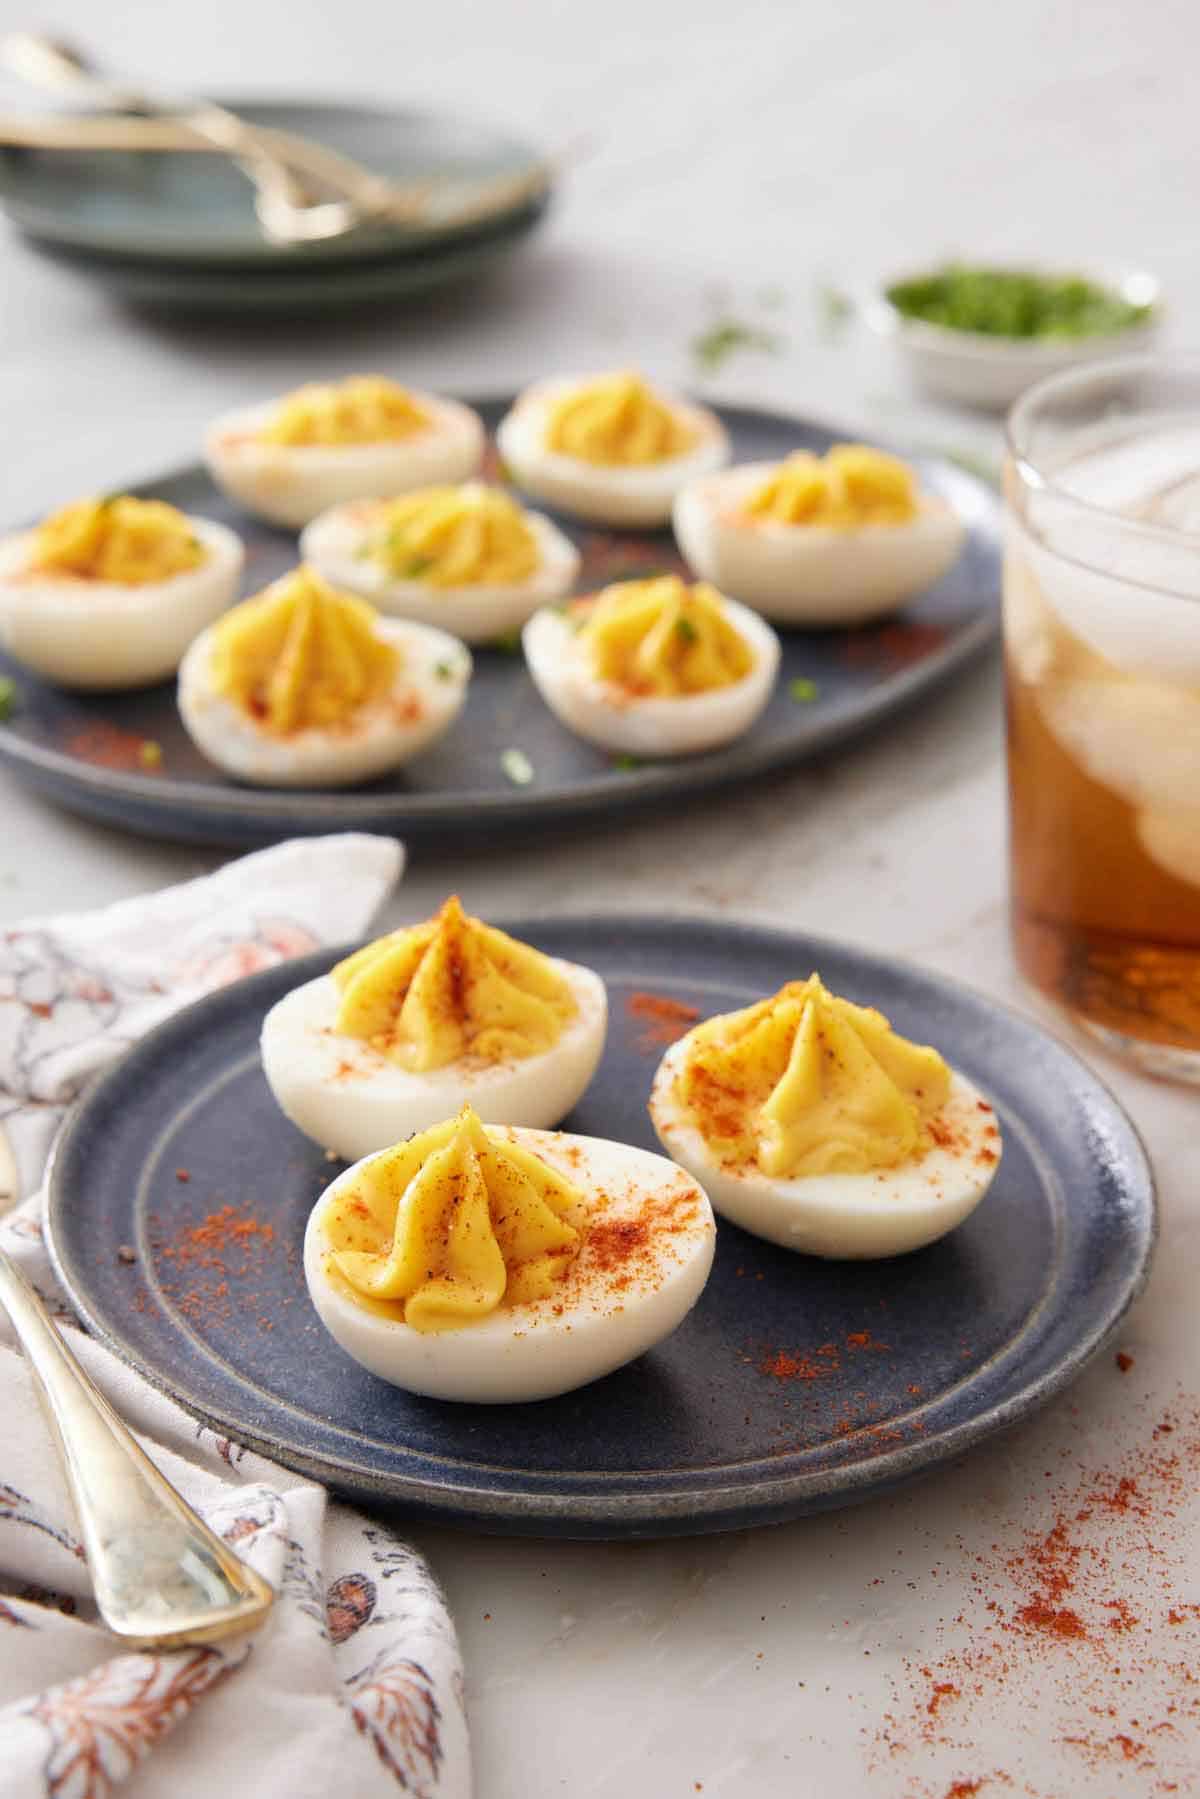 A plate with three deviled eggs with an additional platter in the background with more. A drink off to the side and paprika sprinkled around.